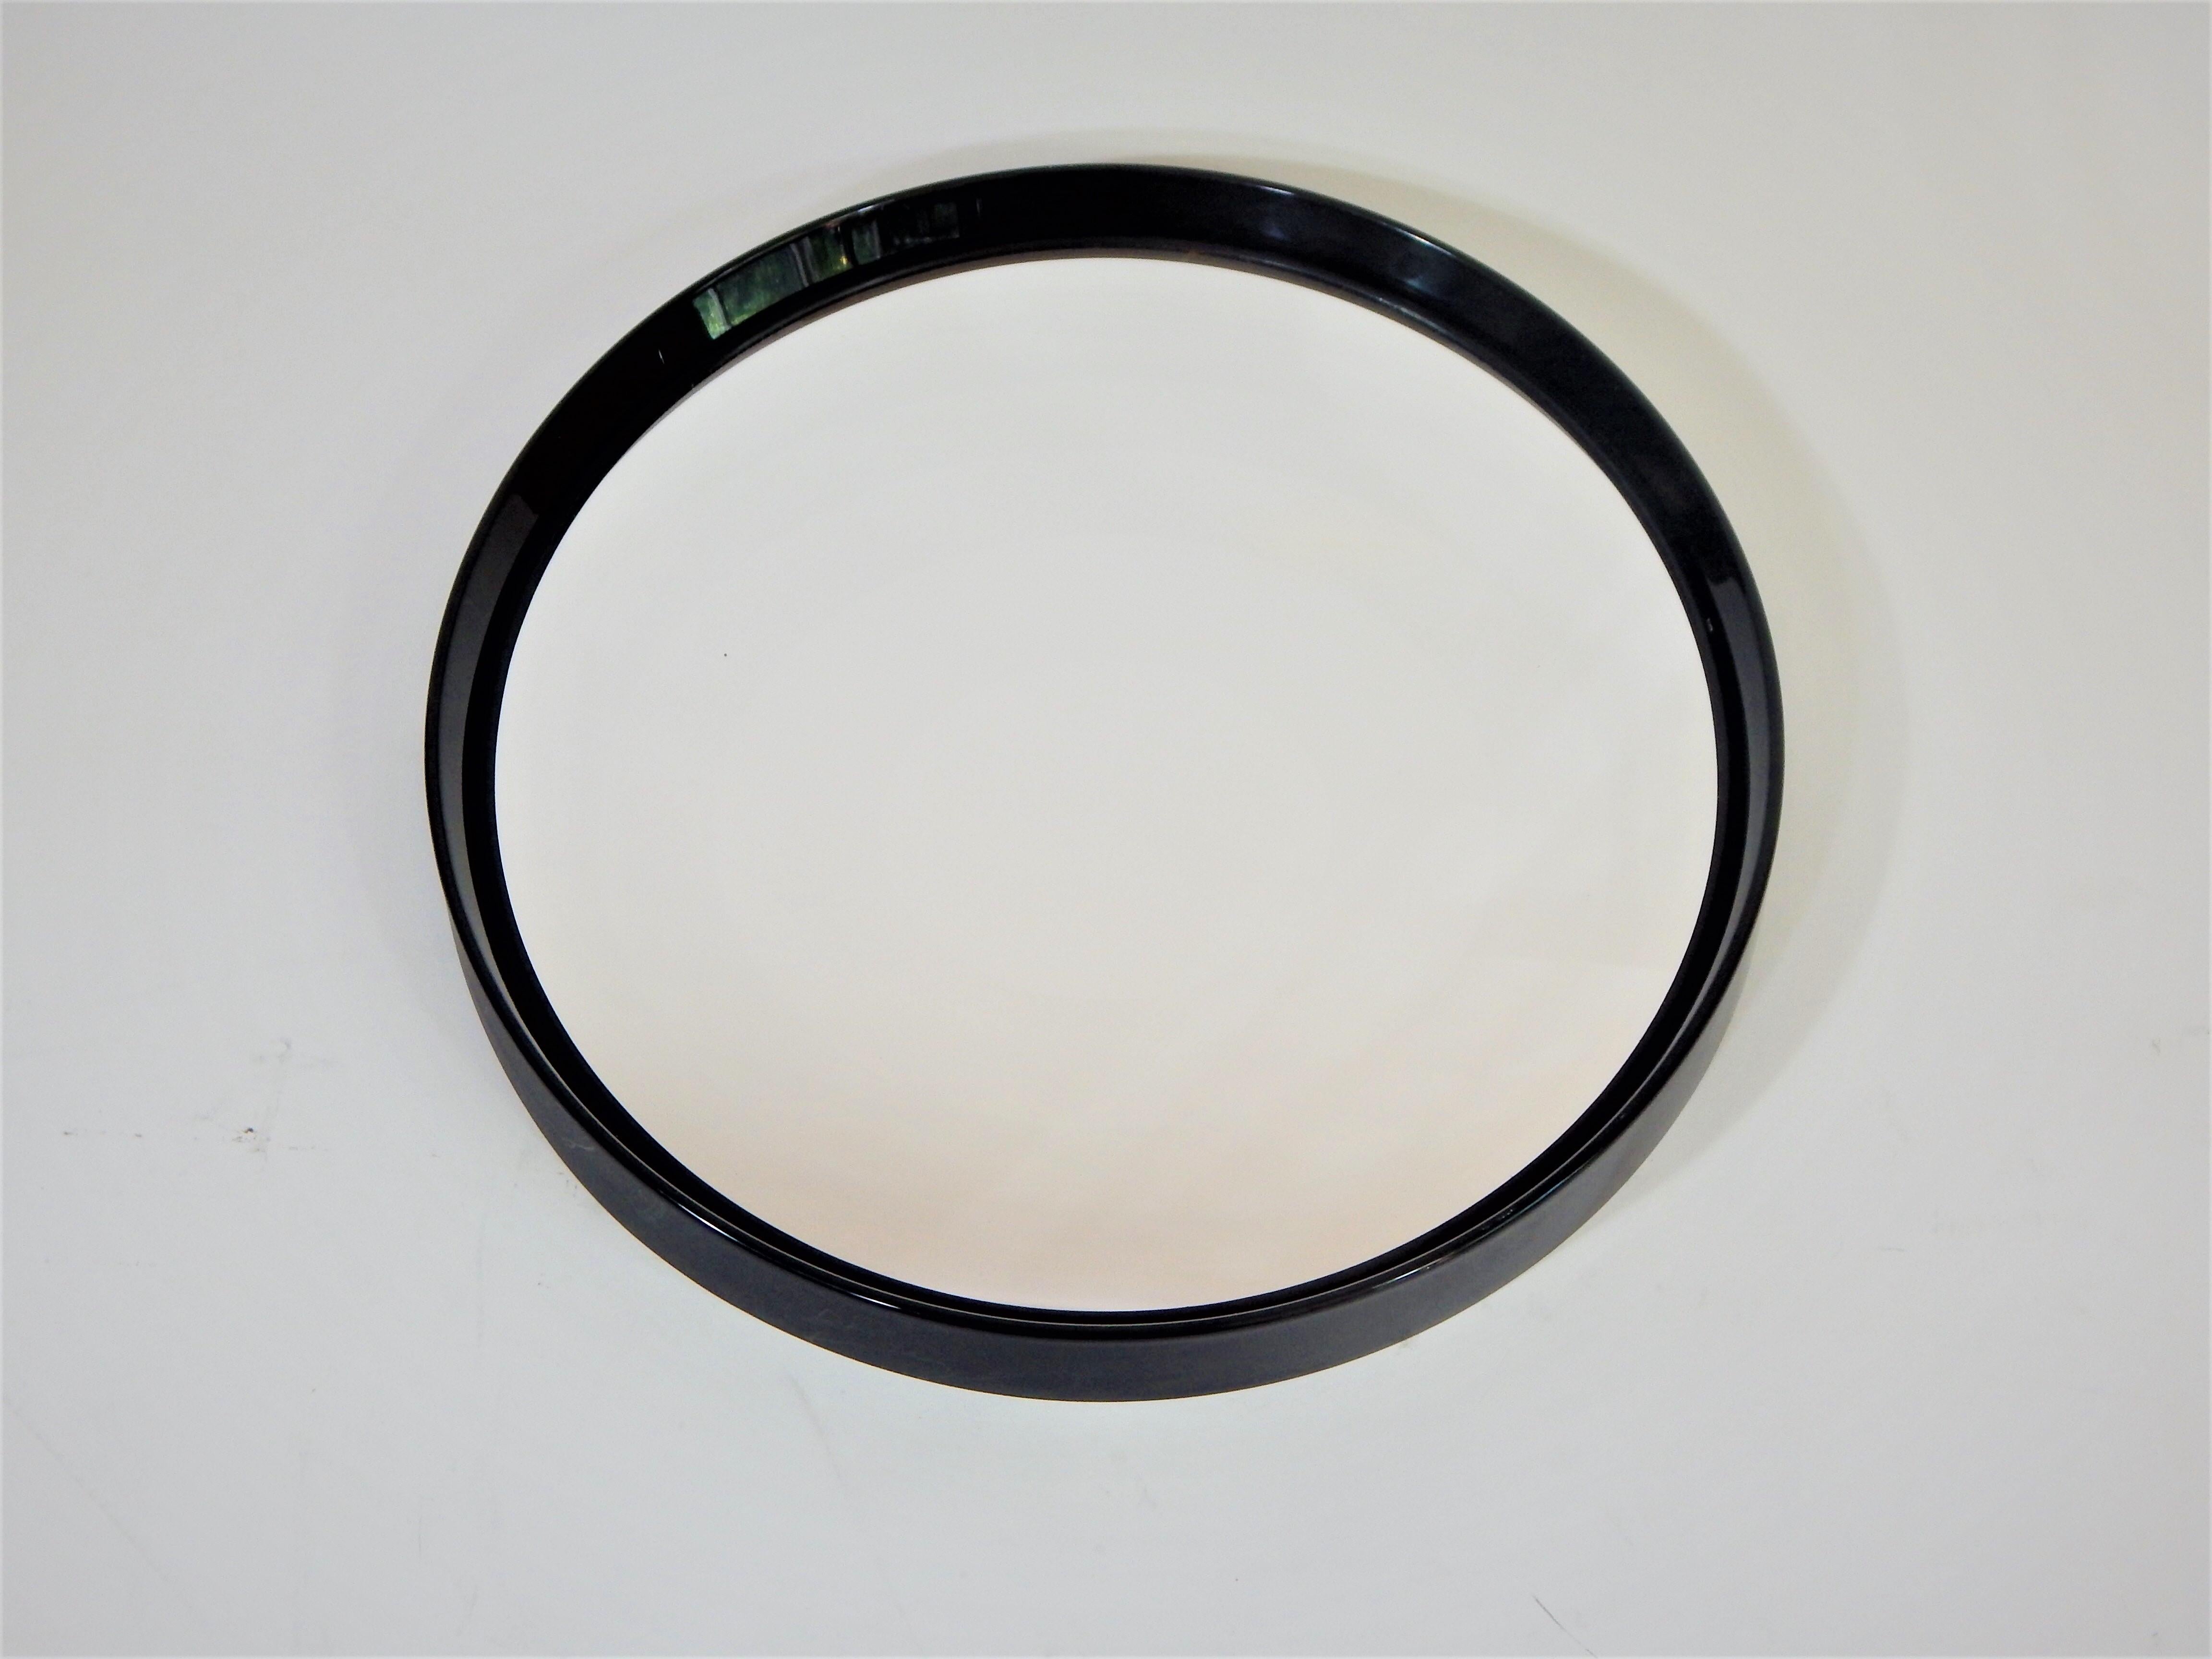 1960s black midcentury round mirror. Designed by Collezione Salc and made in Cantu, Italy. Black glossy finished plastic frame.
Measures: 20 inch diameter, depth when hanging is 2.25.